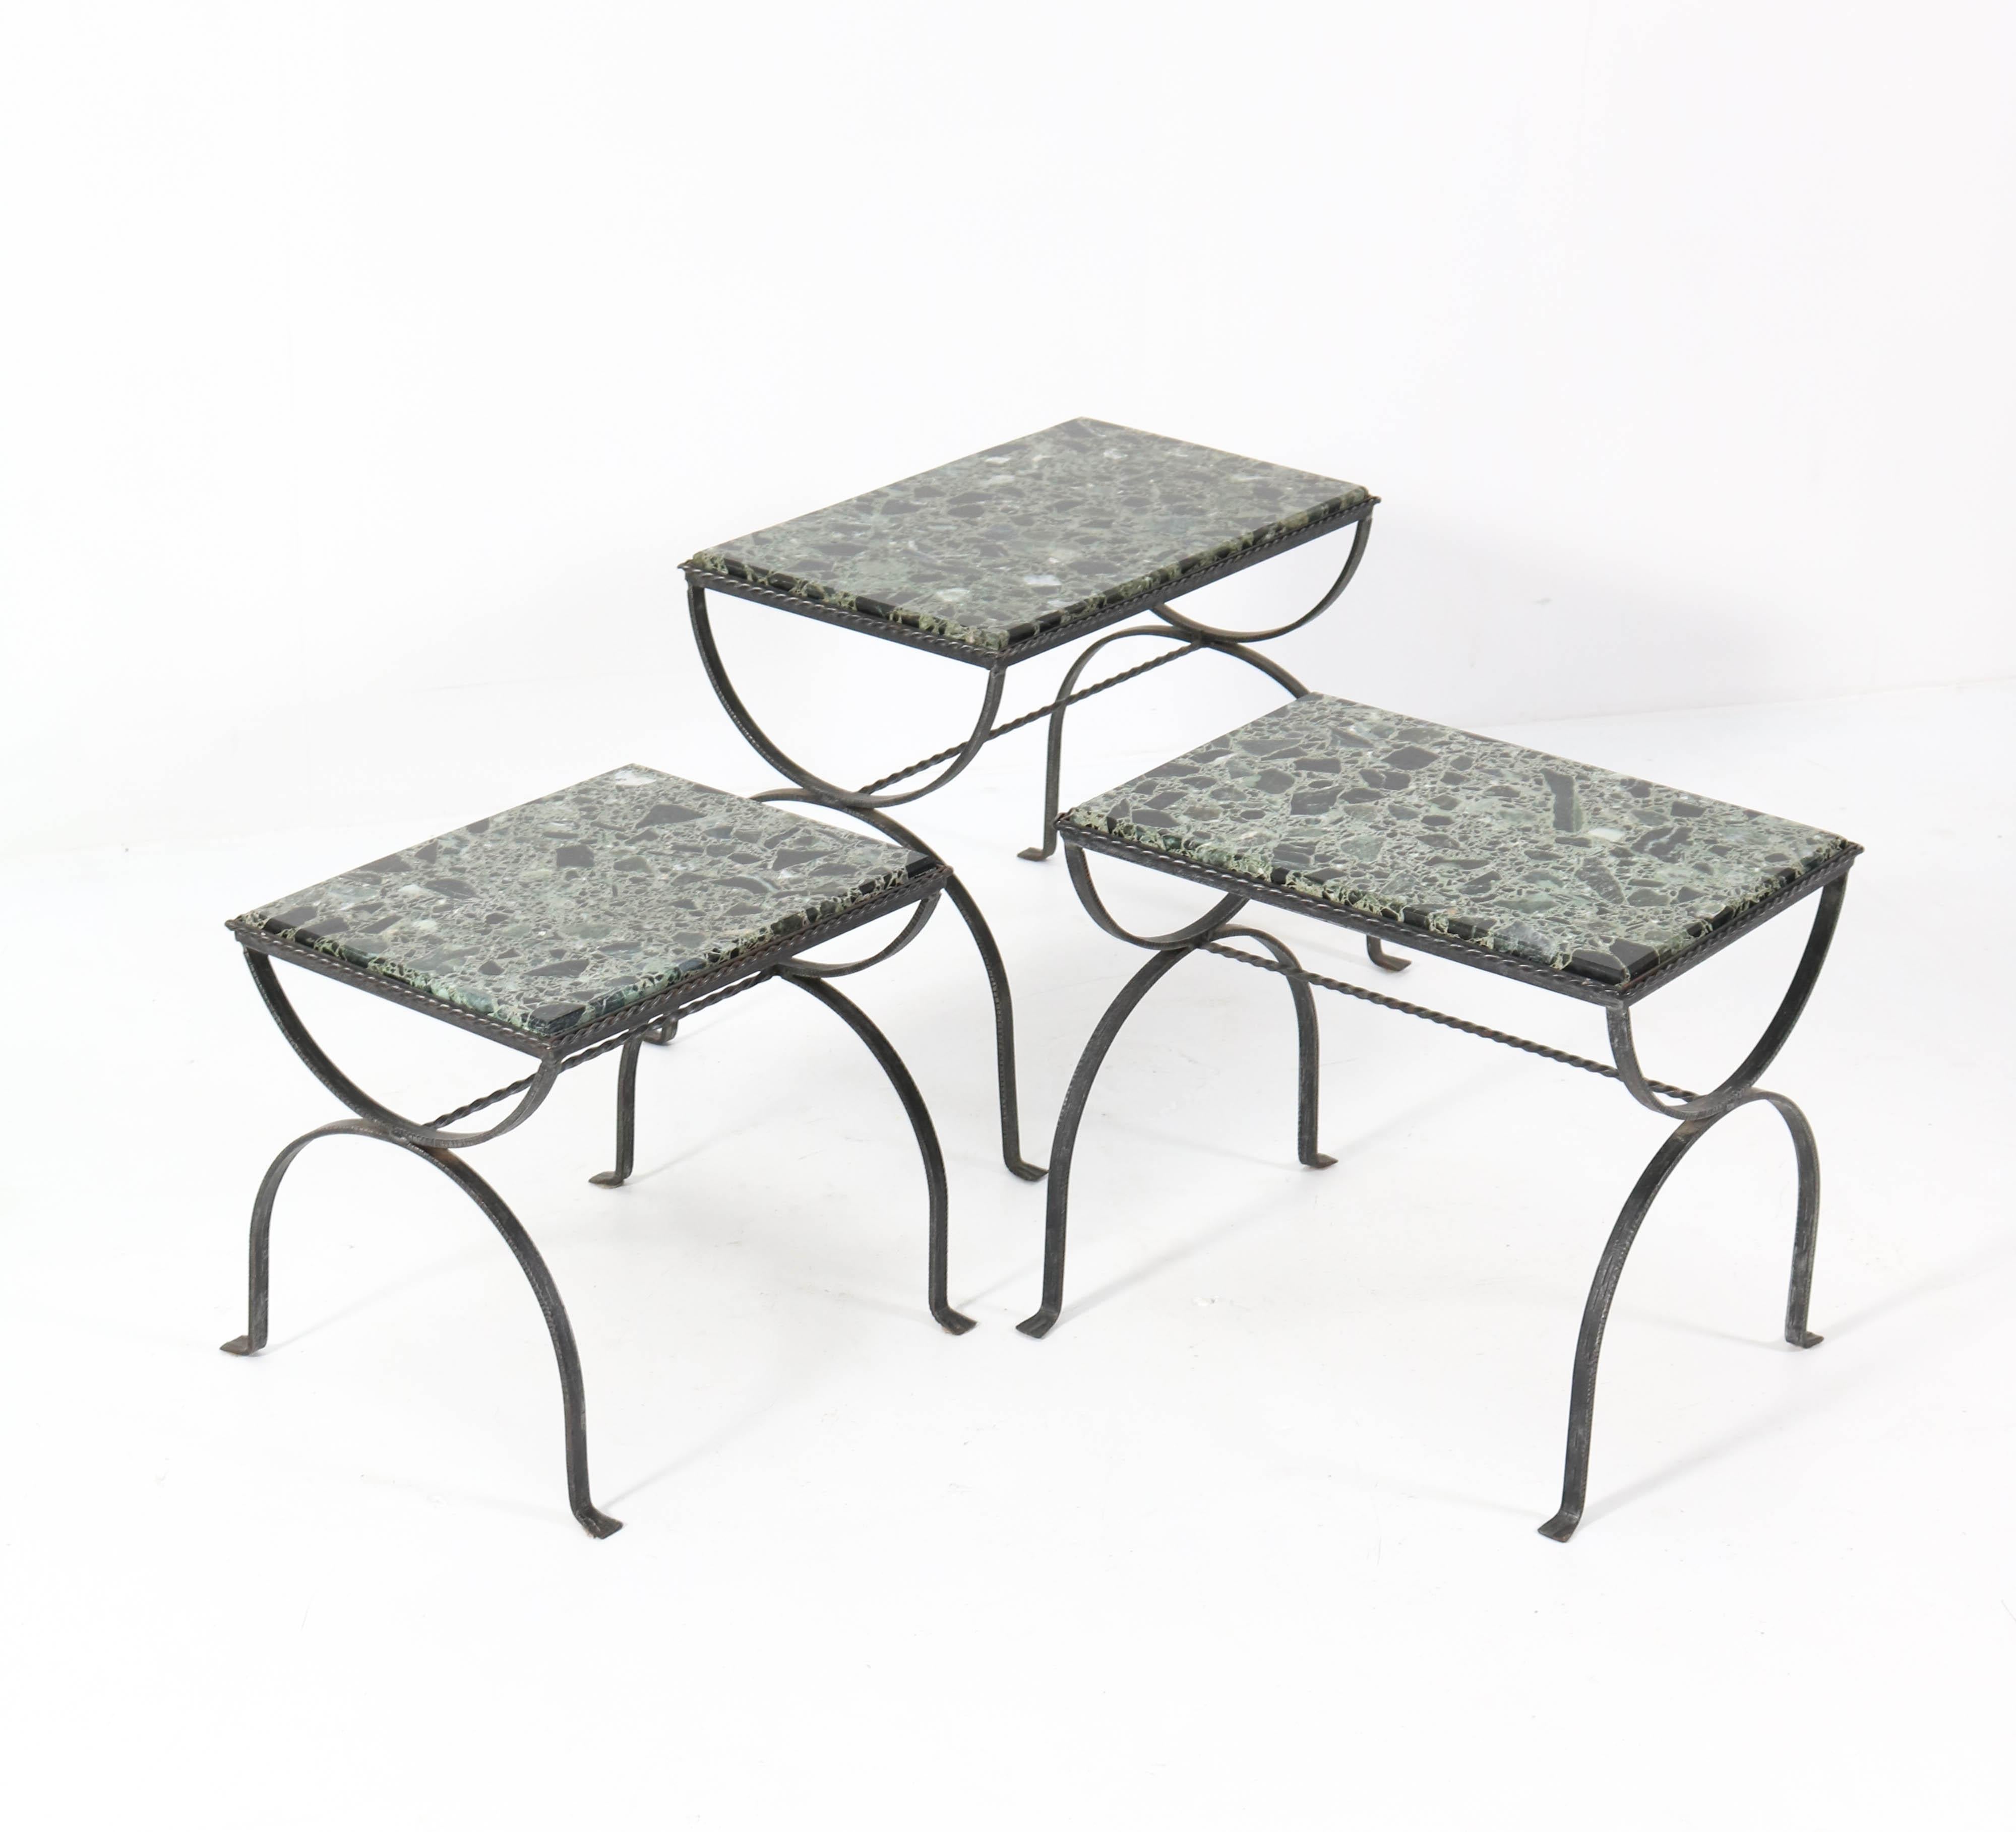 Wonderful set of three Hollywood Regency nesting tables.
Striking French design from the seventies.
Three black lacquered iron frames with three original onyx tops.
In very good condition with minor wear consistent with age and use,
preserving a